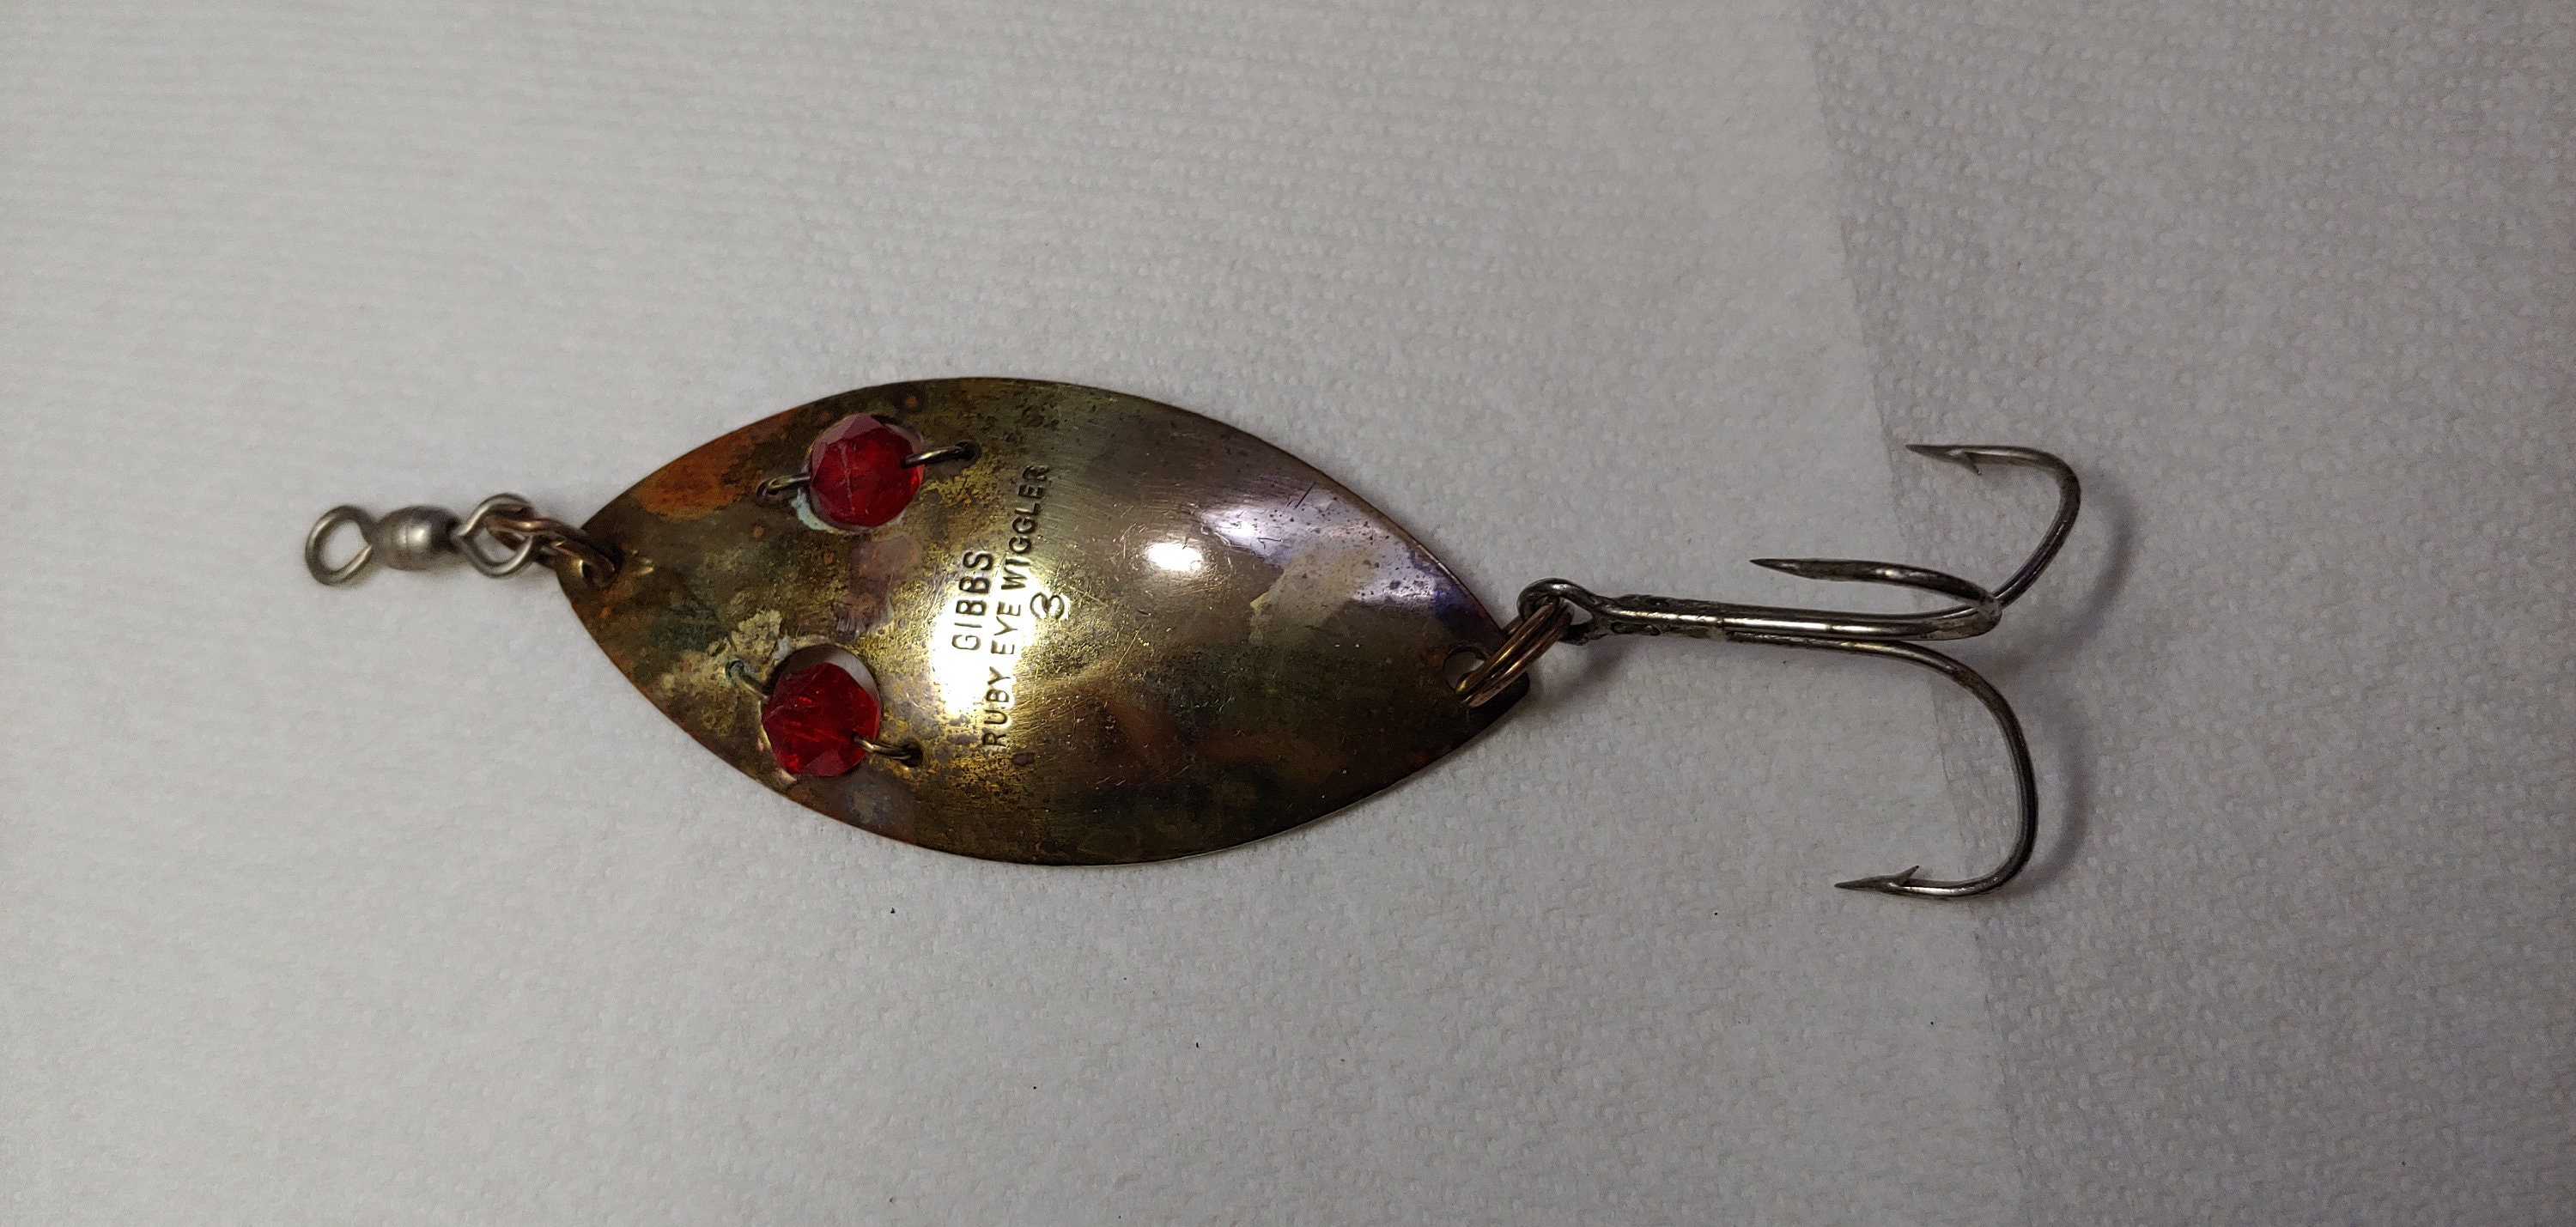 ORIGINAL FORCED Gibbs Ruby Eye Wiggler No. 3.5 From 1960s -  Canada